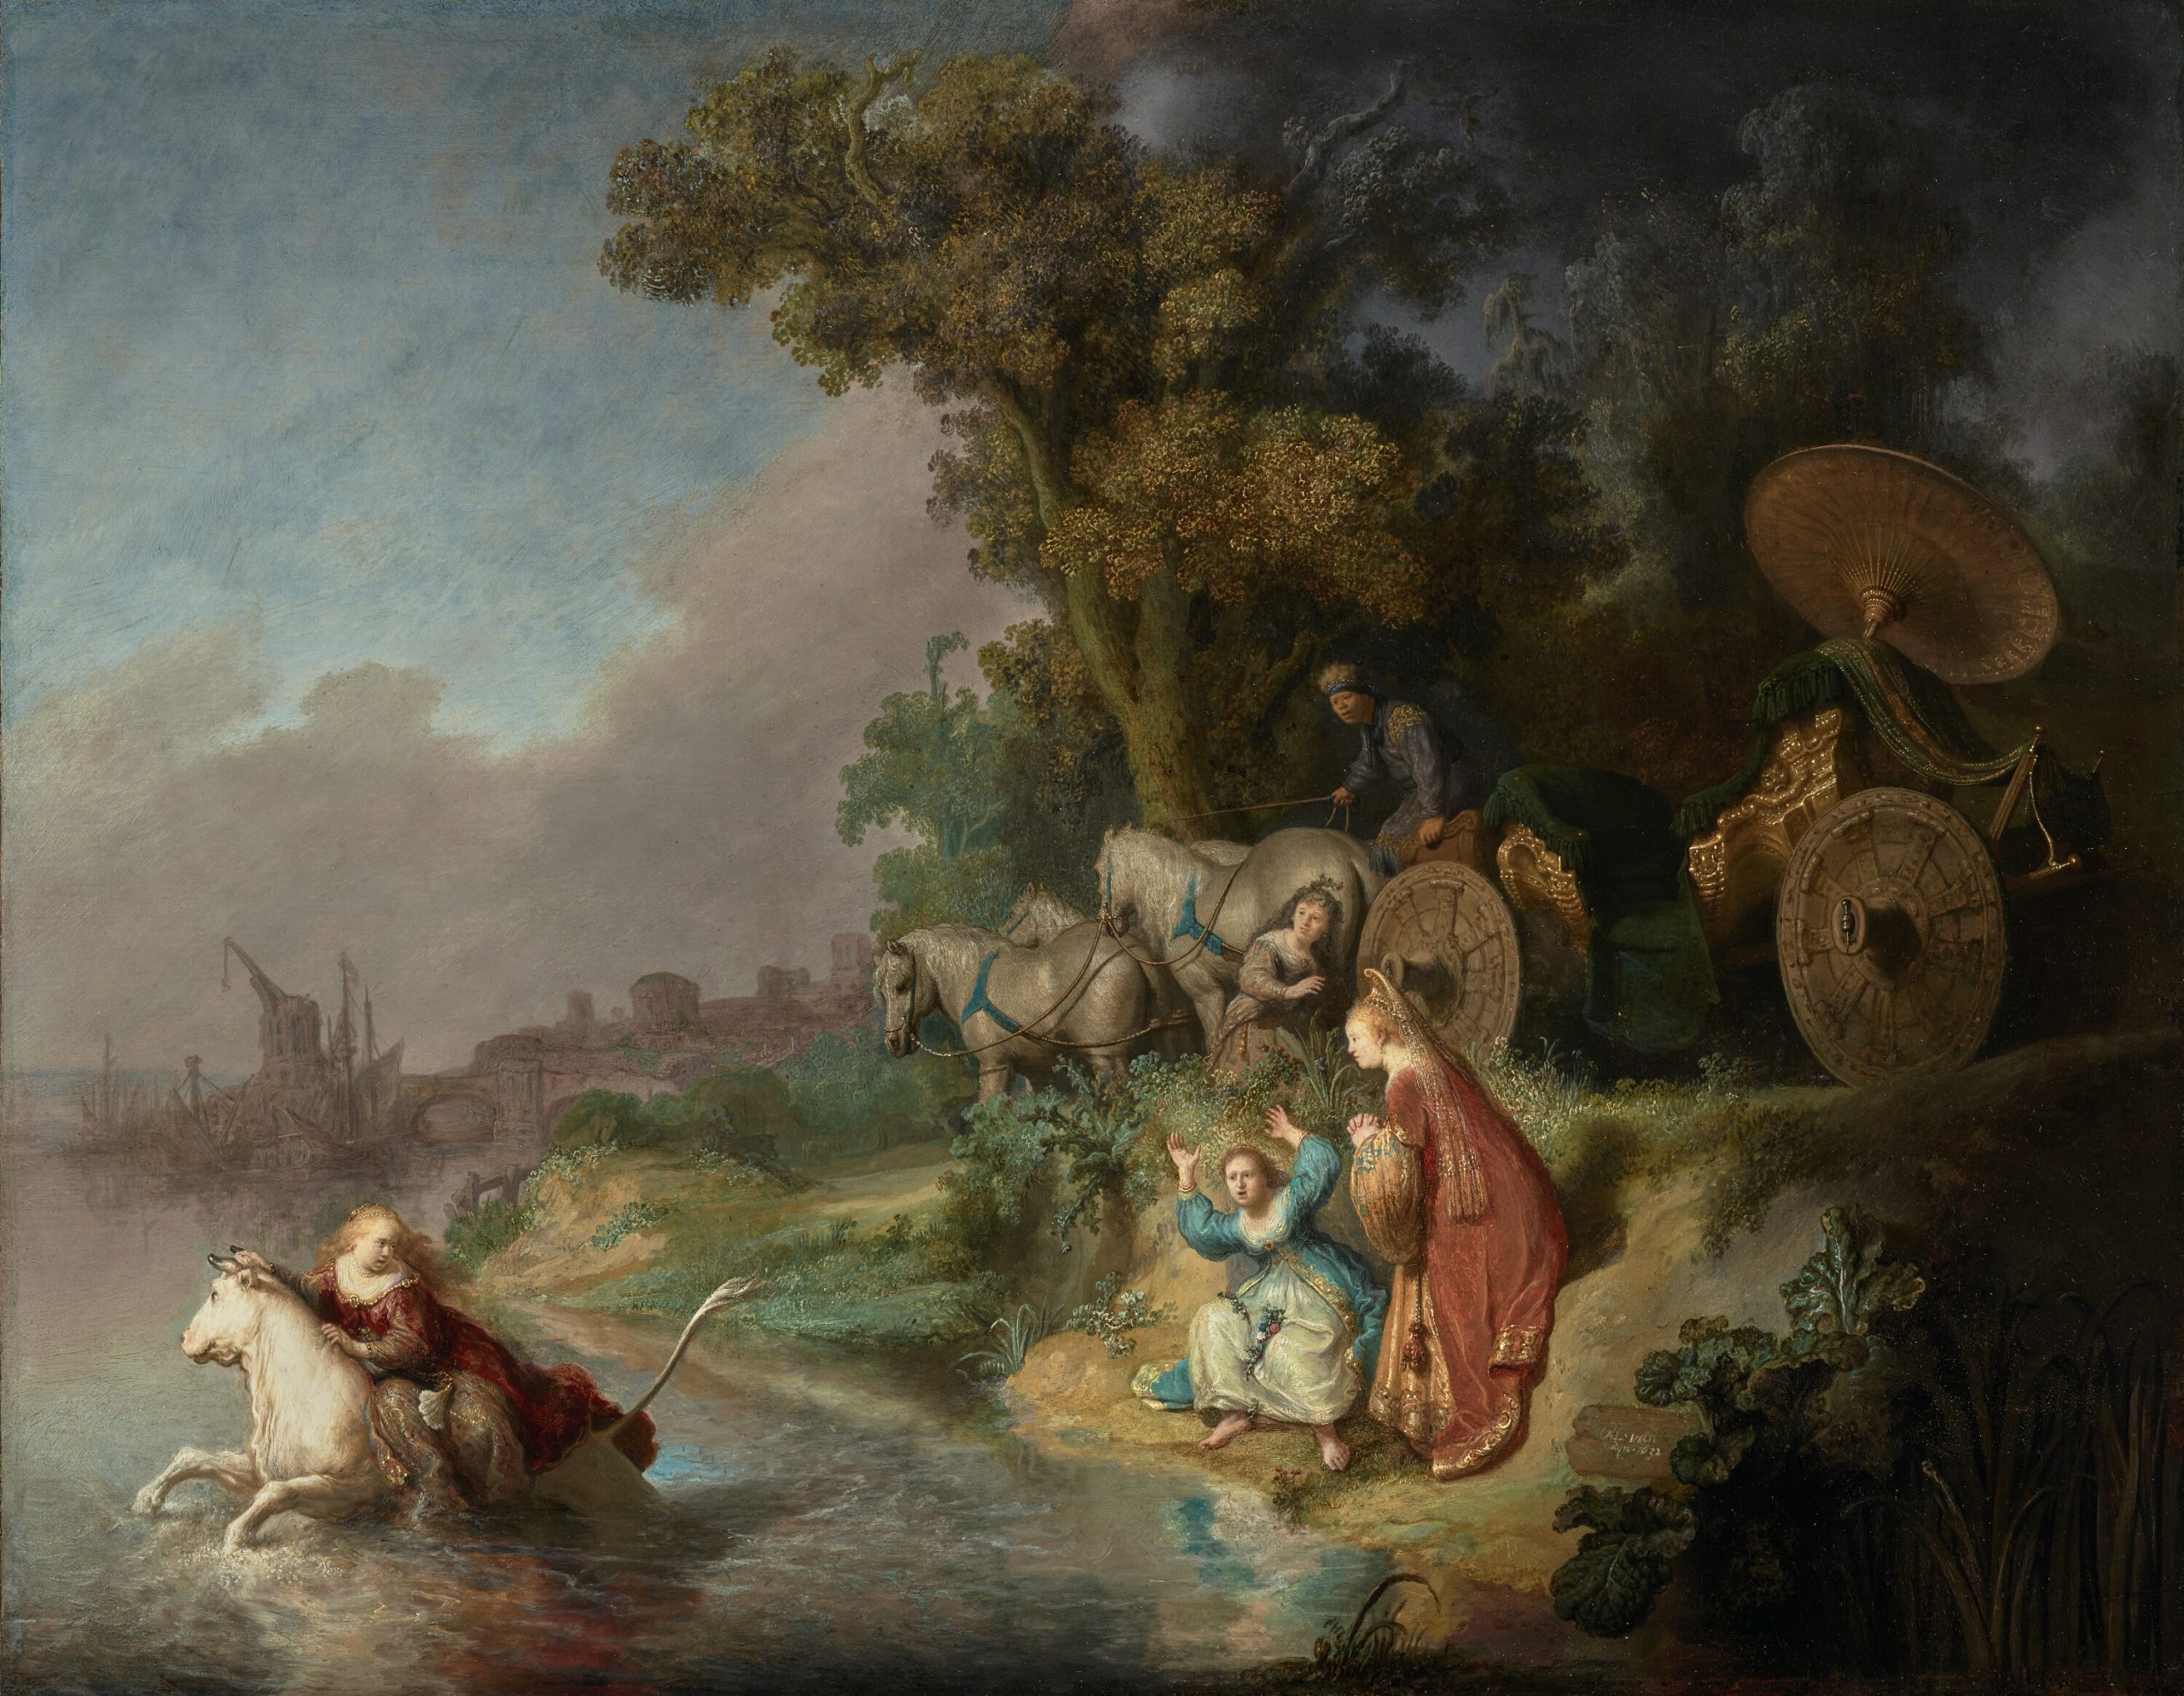 A painting depicting people on a bank of a river. A man on horseback is seen in the water while there are onlookers on the bank with a carriage in the background. The setting is lush with green grass, blue skies with billowy clouds, an calm water.